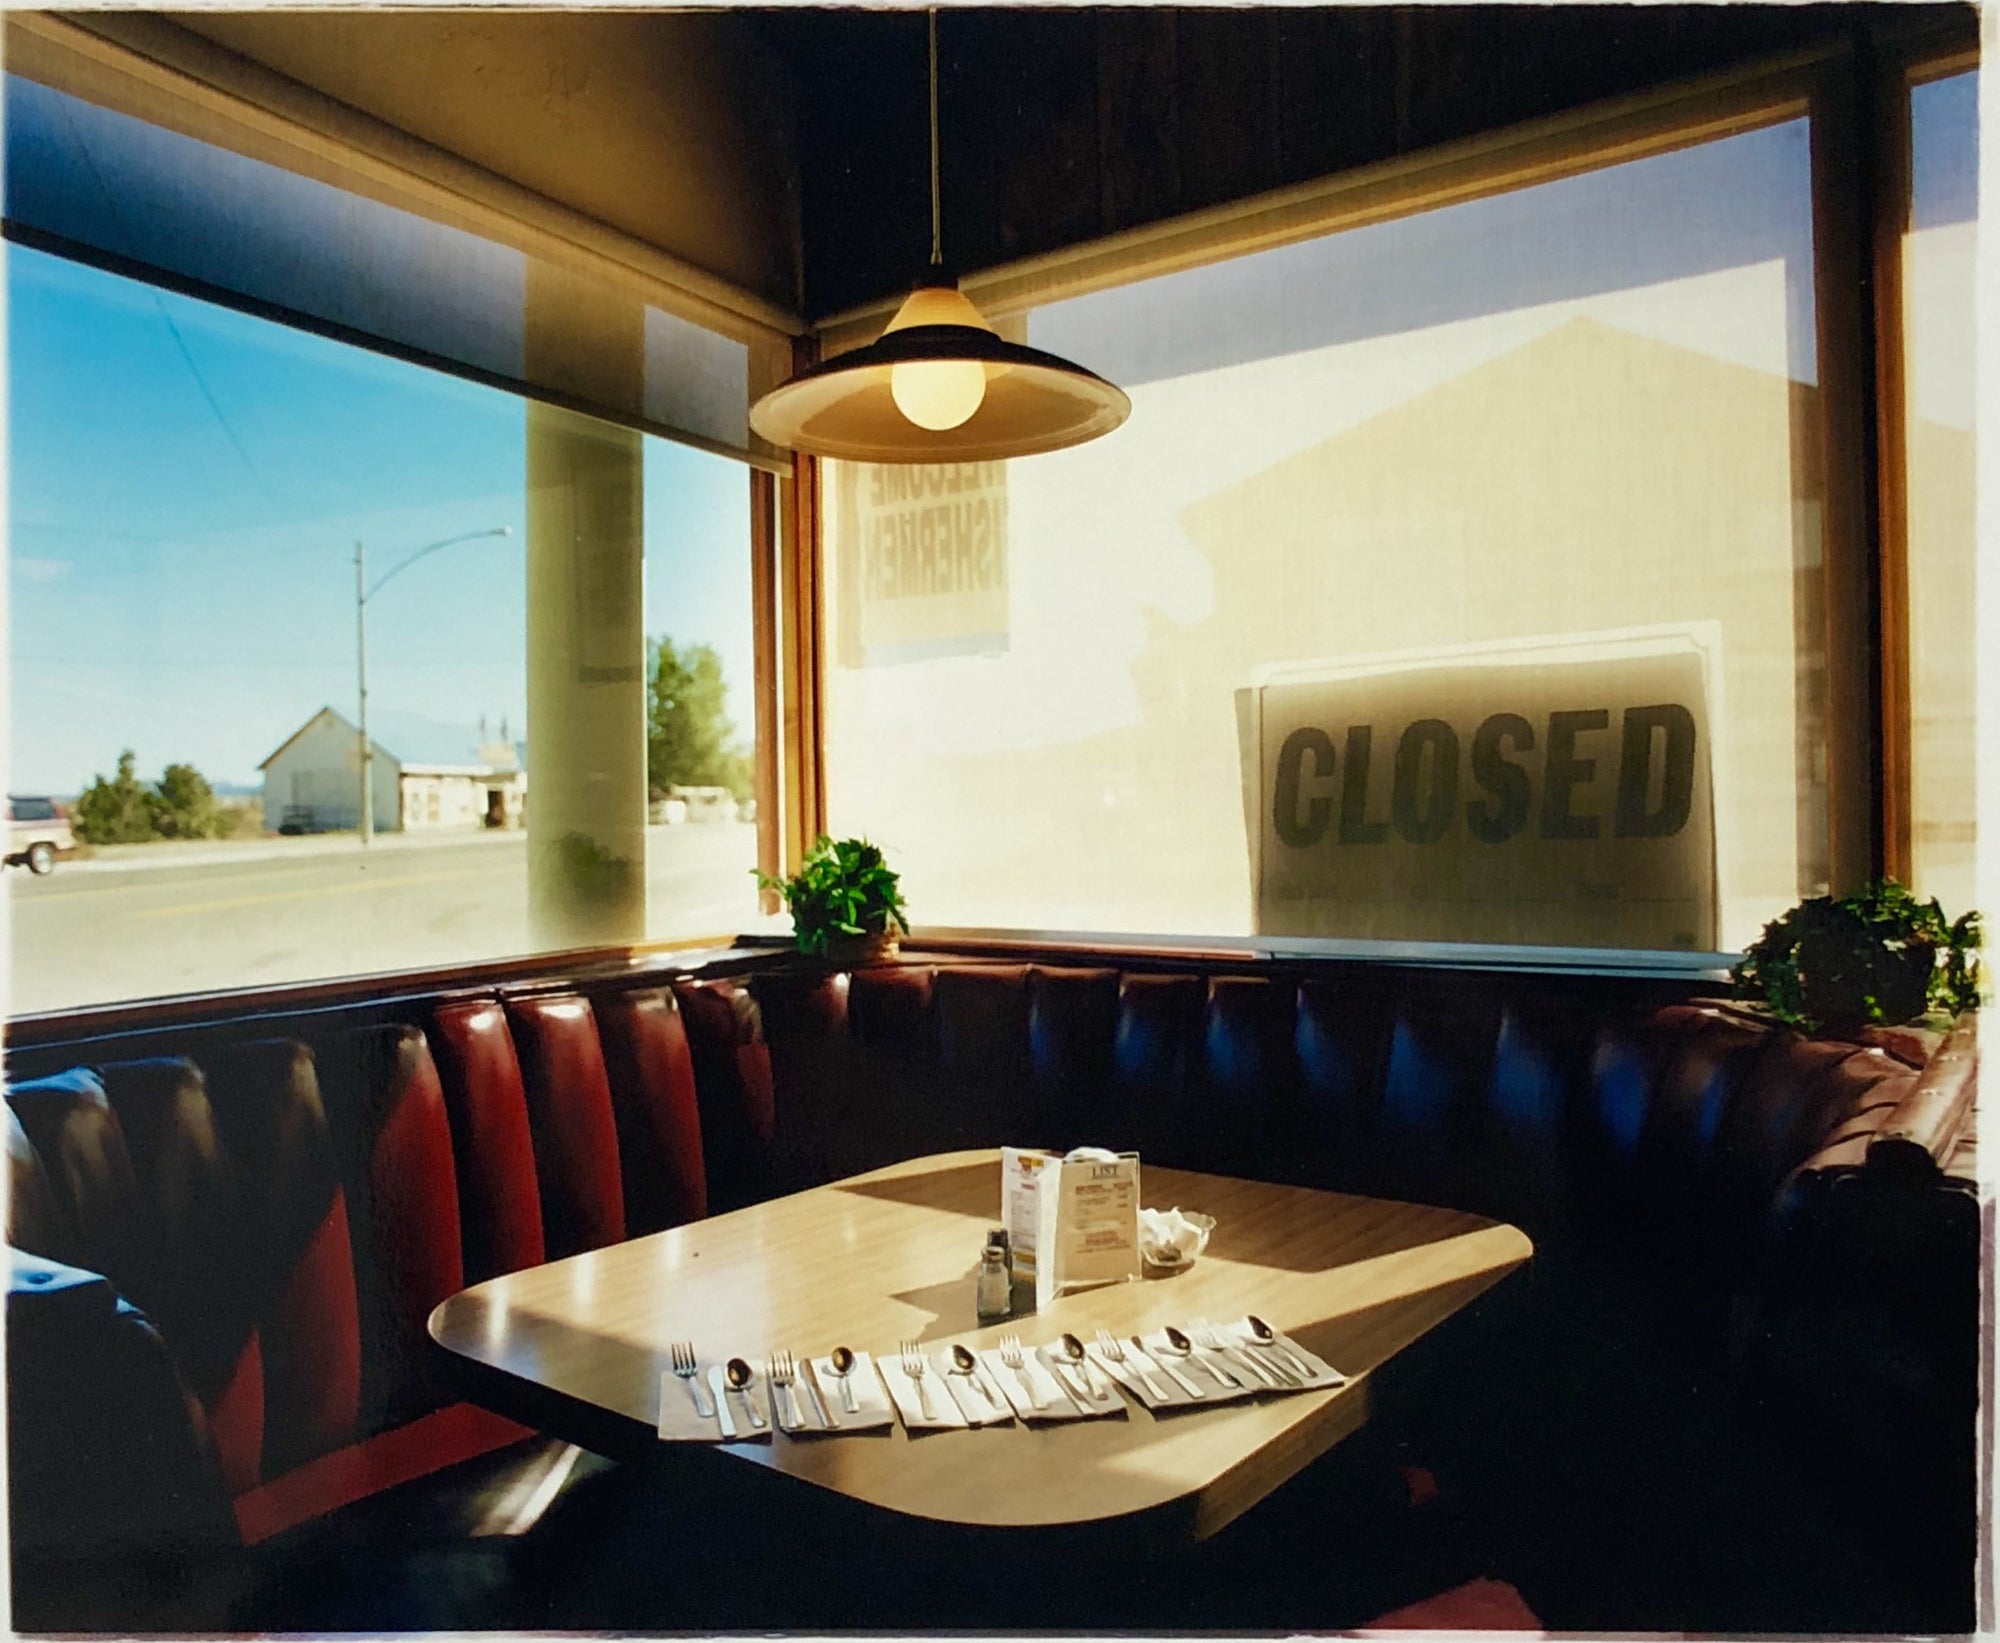 American Diner, cinematic interior photography by Richard Heeps